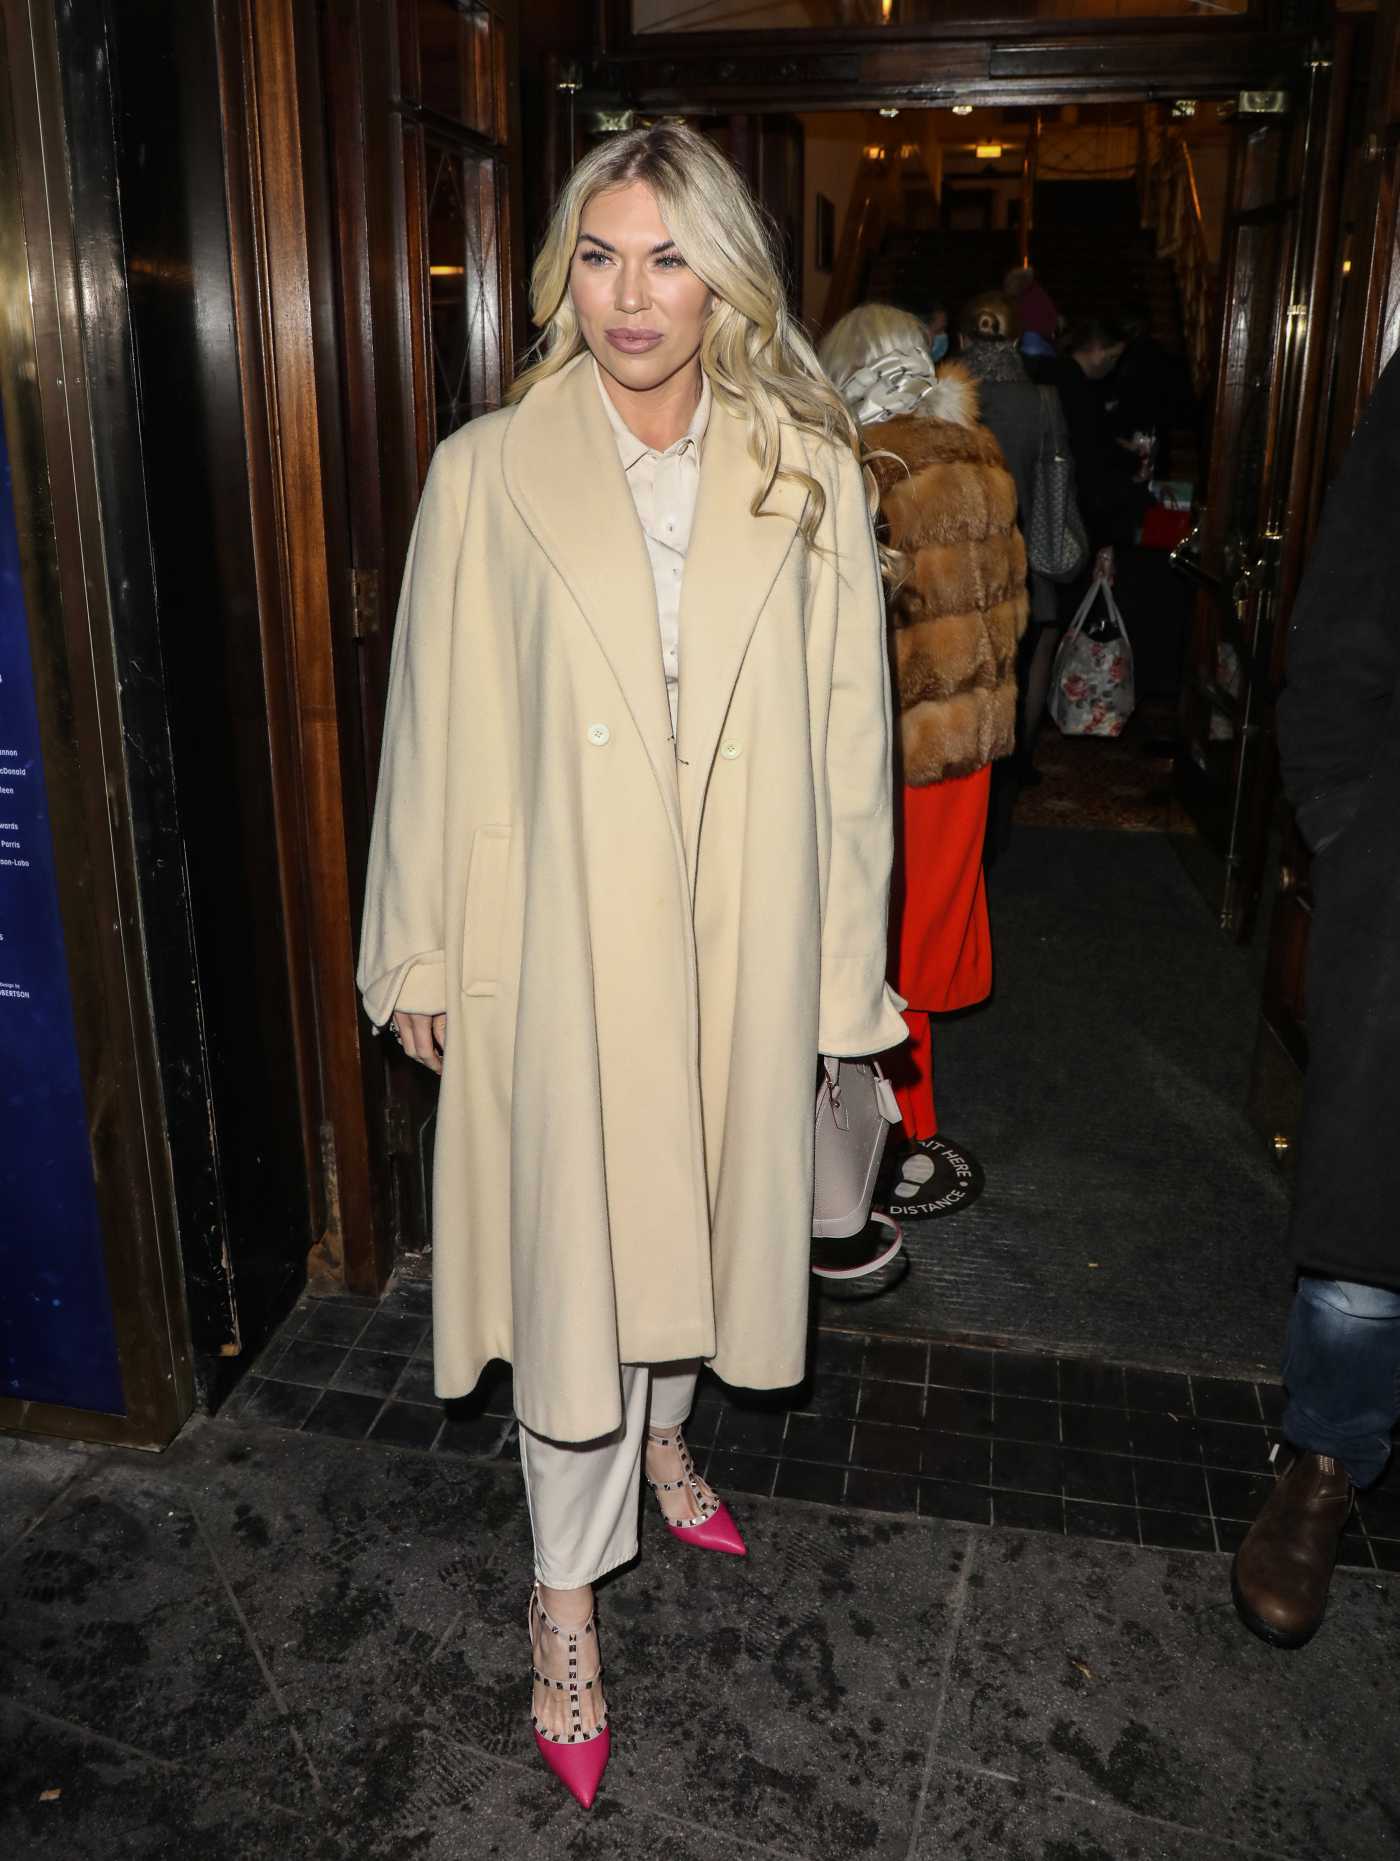 Frankie Essex in a Yellow Coat Arrives at the Press Night for A Christmas Carol at the Dominion Theatre in London 12/14/2020